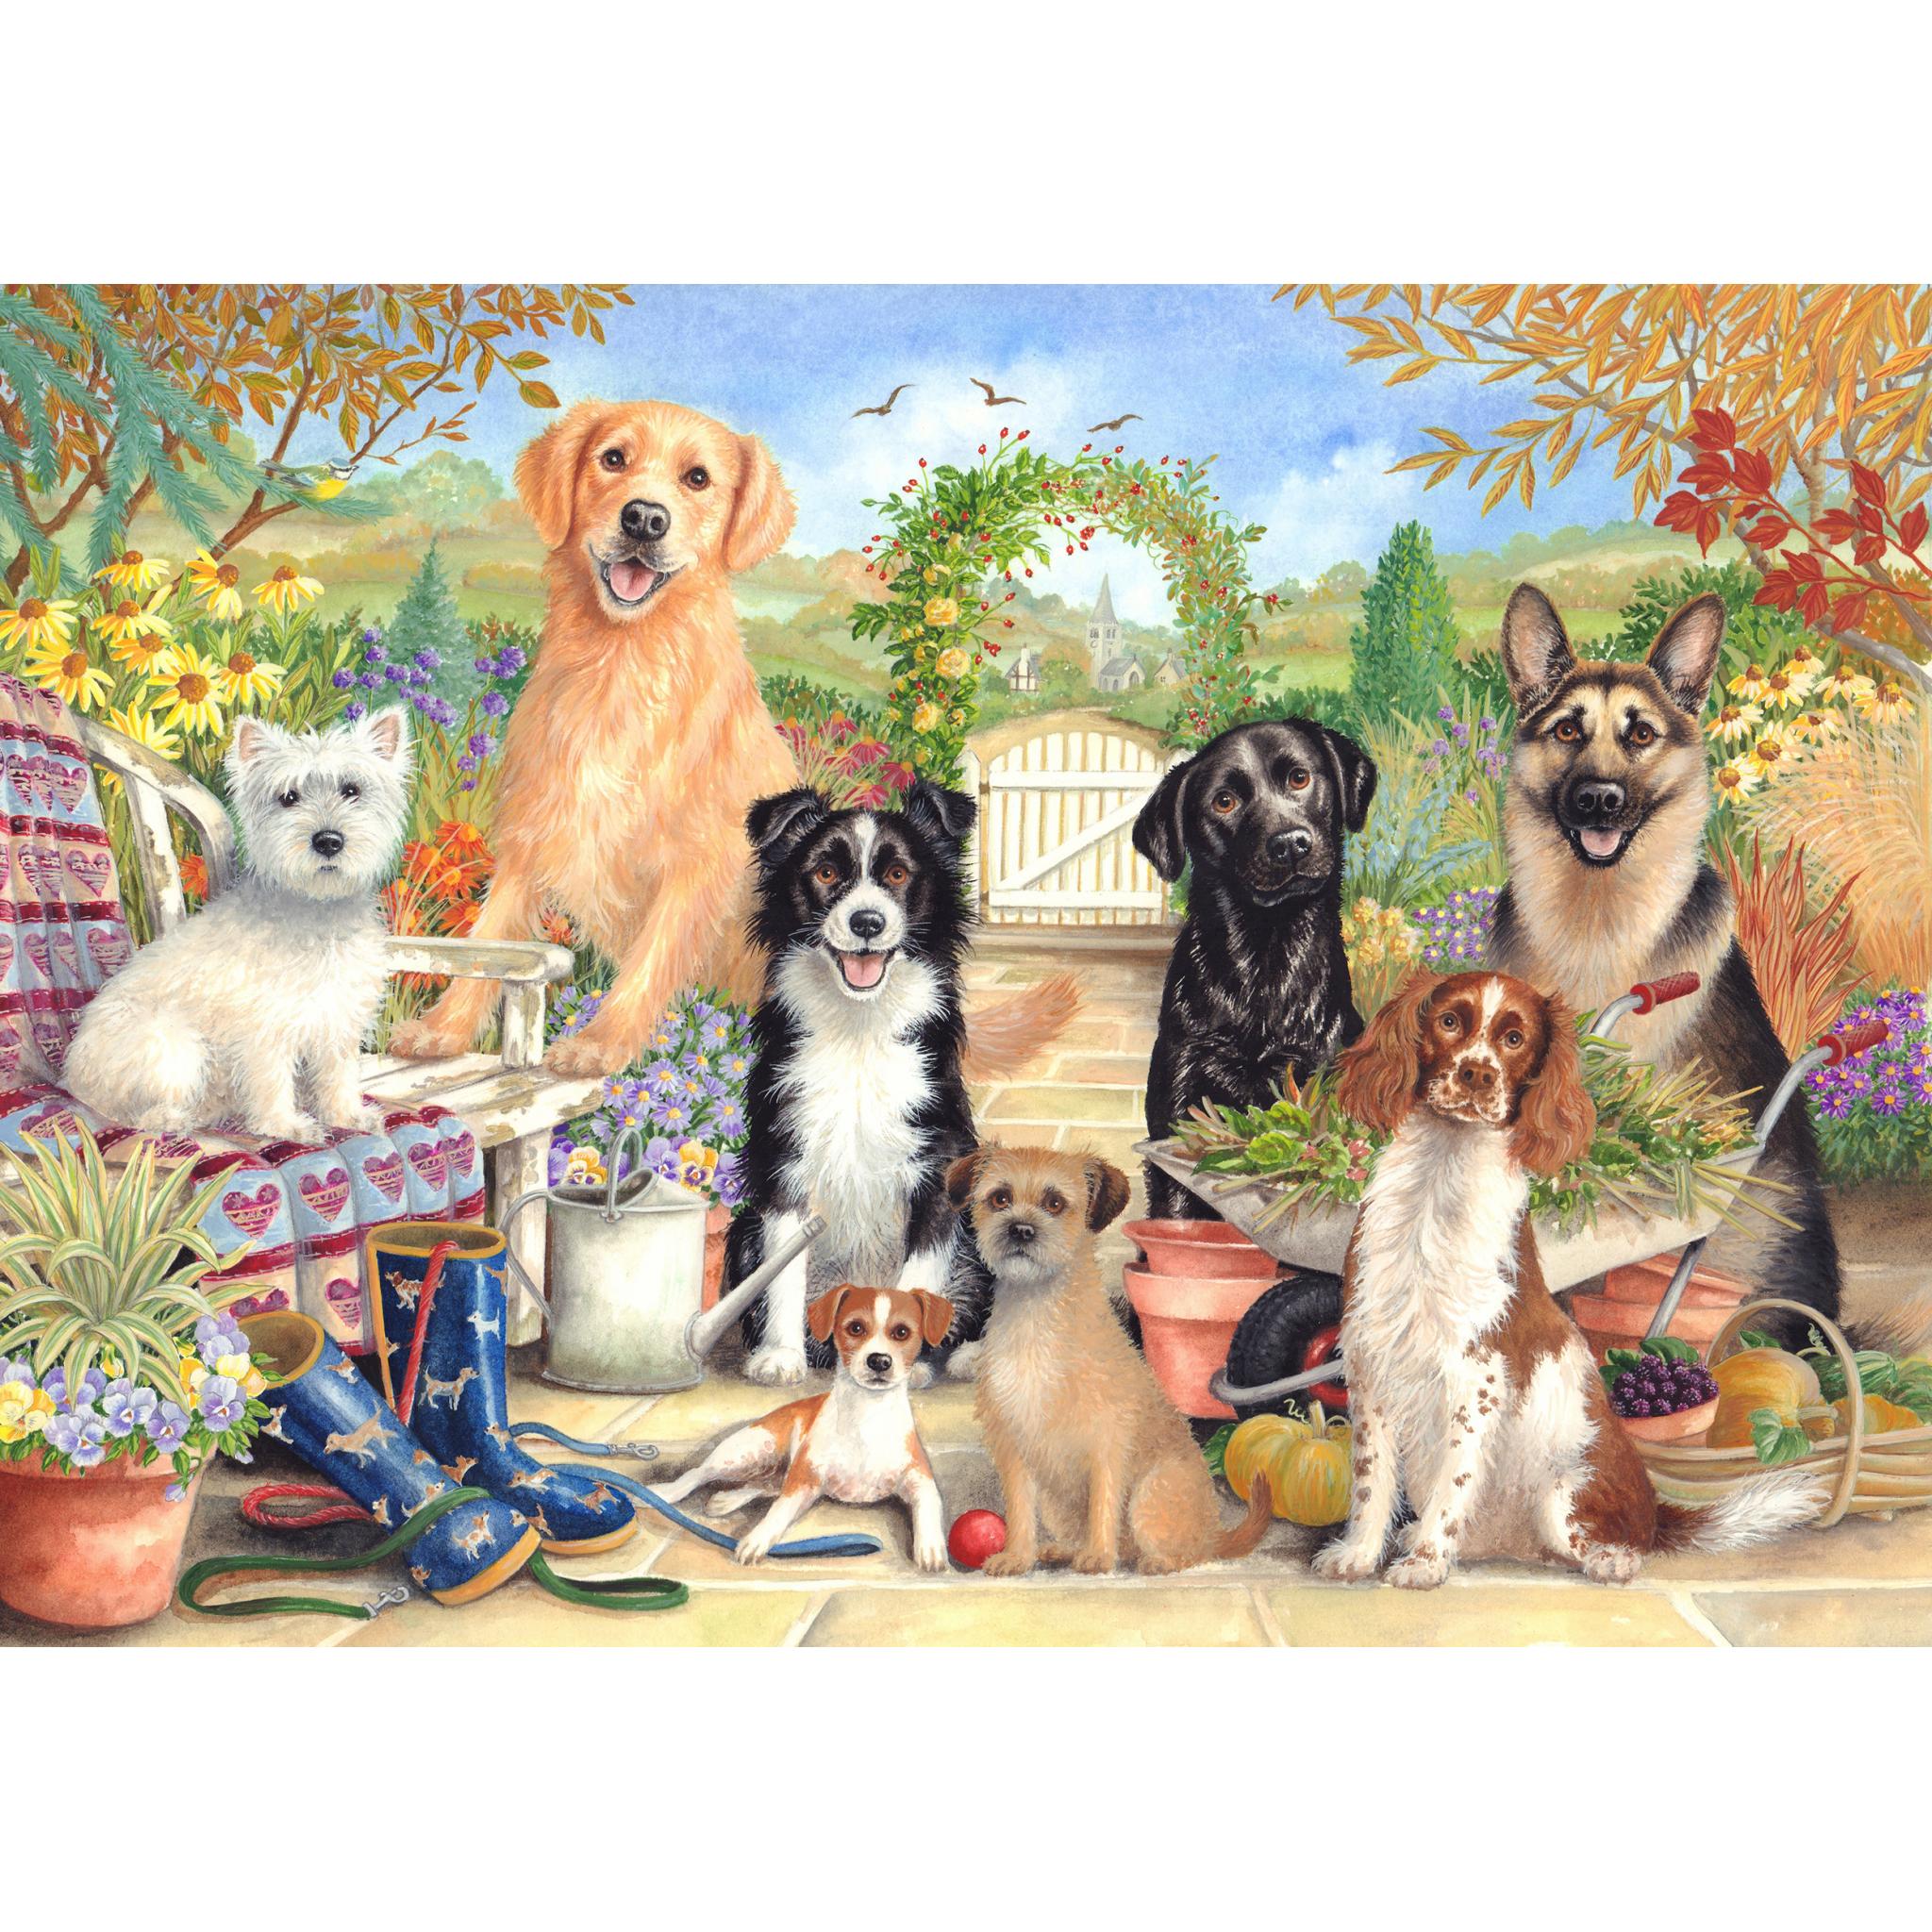 An illustration of seven dogs sitting in a garden looking forwards. A Scottie is sitting on a blanket on a bench, and there are lots of plants and trees in the background.